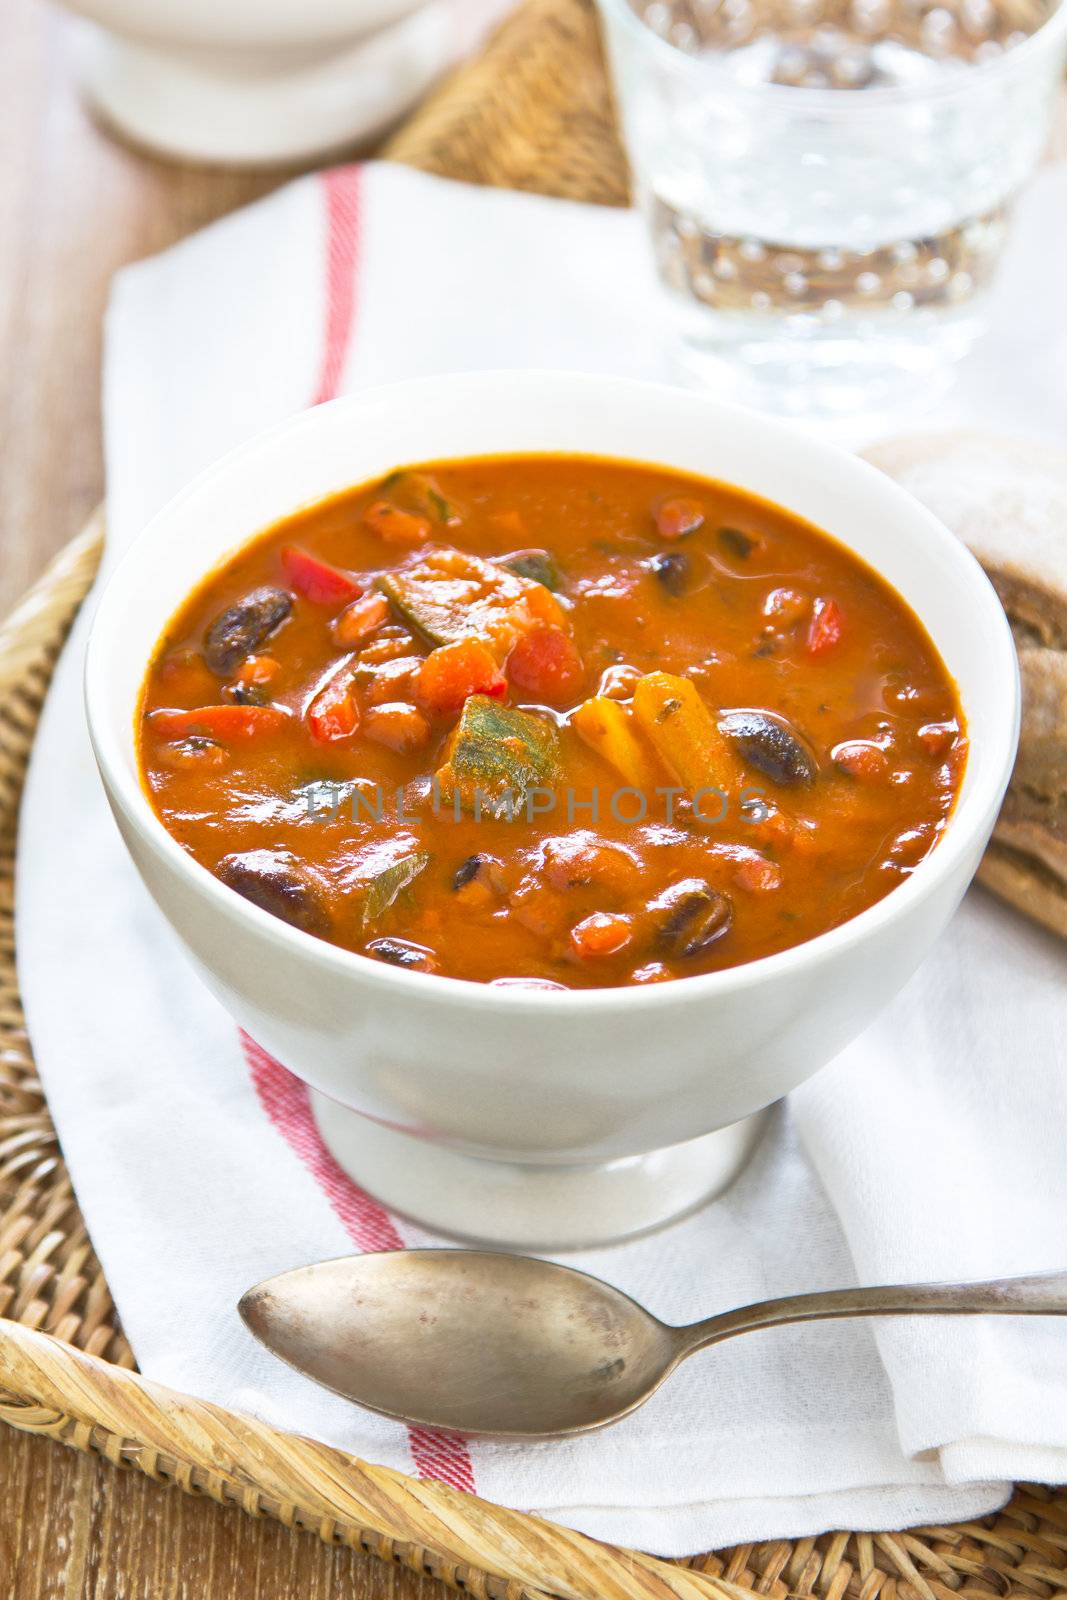 Minestrone soup [Zucchini,aubergine,bean,pepper and carrot in tomato soup ] by a loaf of bread